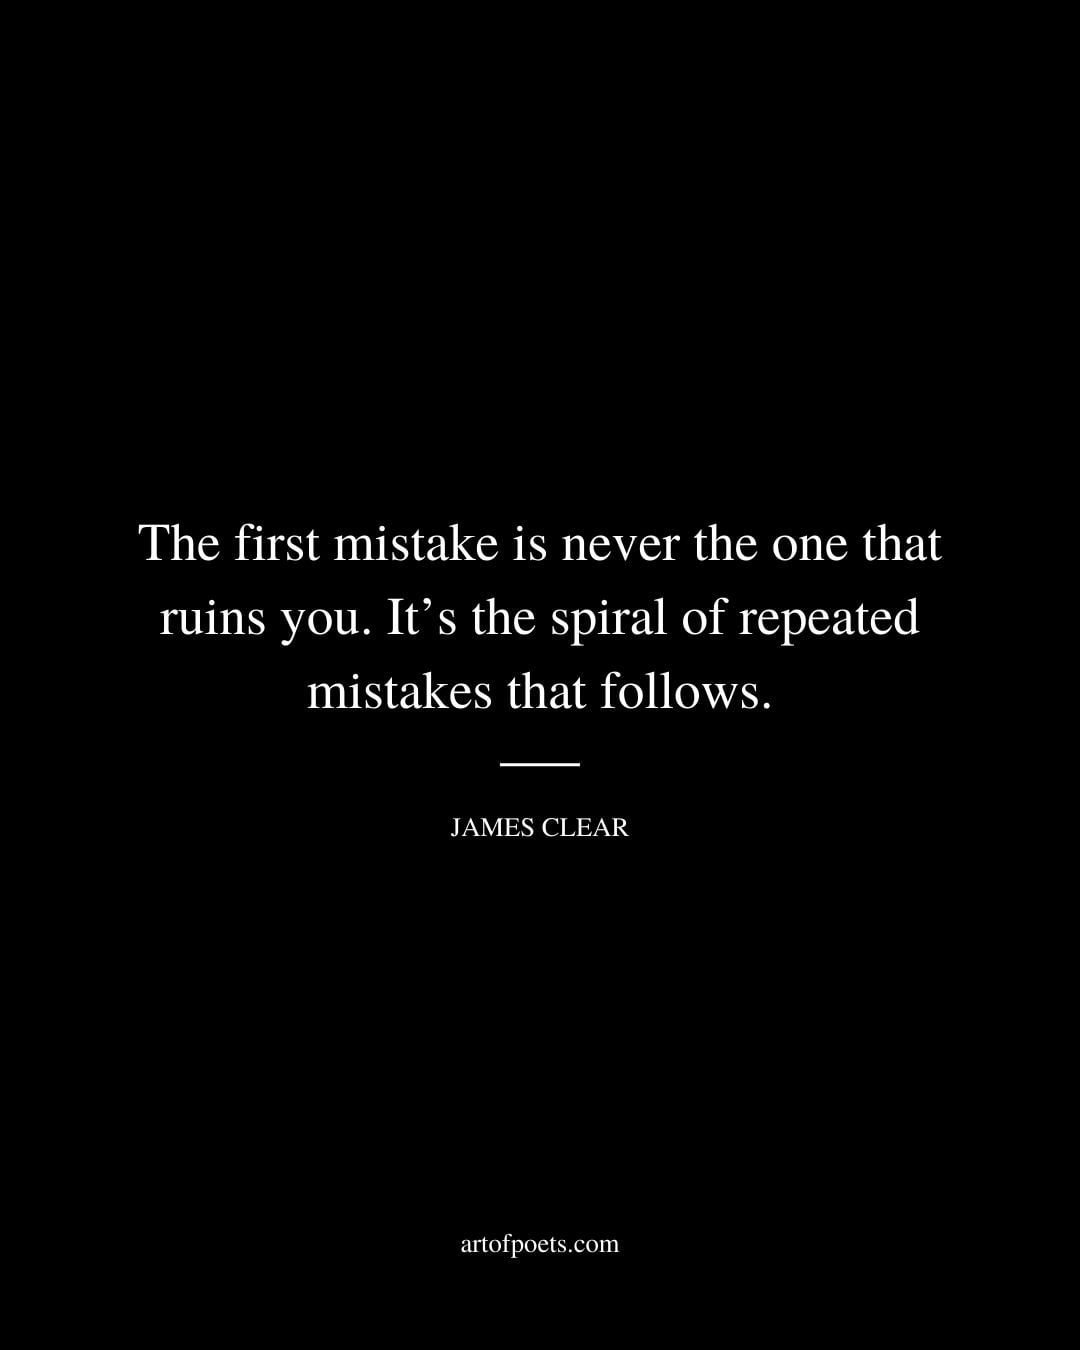 The first mistake is never the one that ruins you. Its the spiral of repeated mistakes that follows